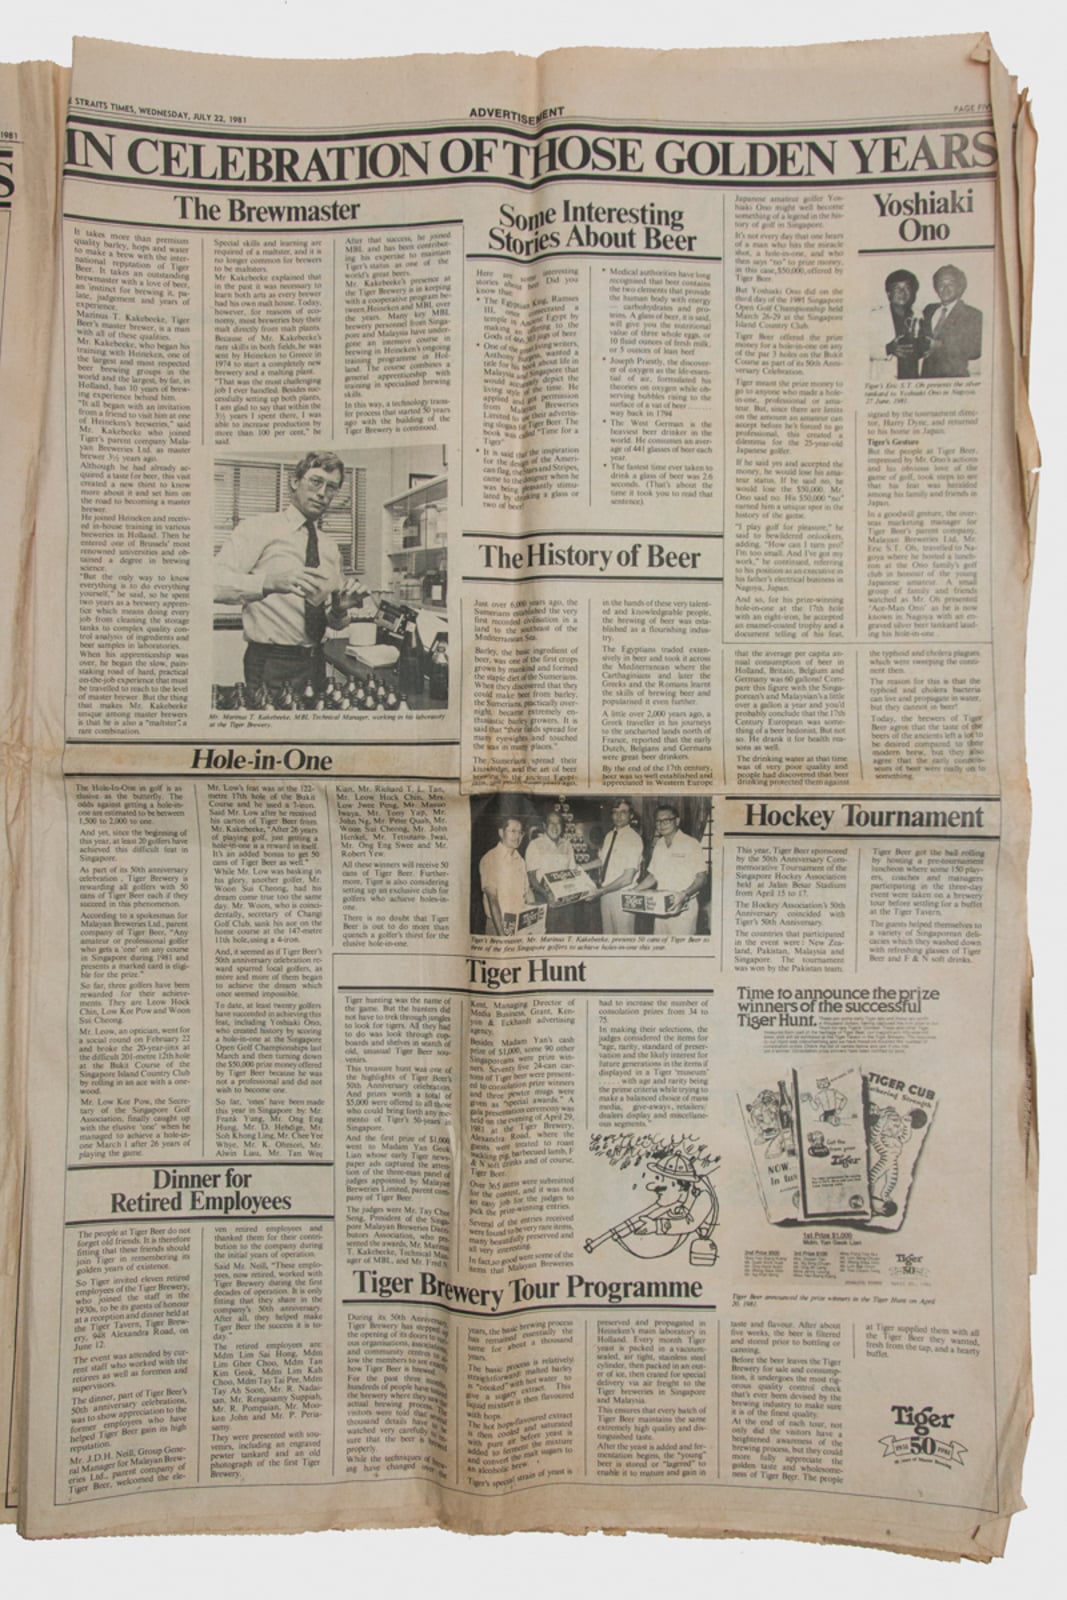 Tiger Beer Articles/Advertisements on Newspaper